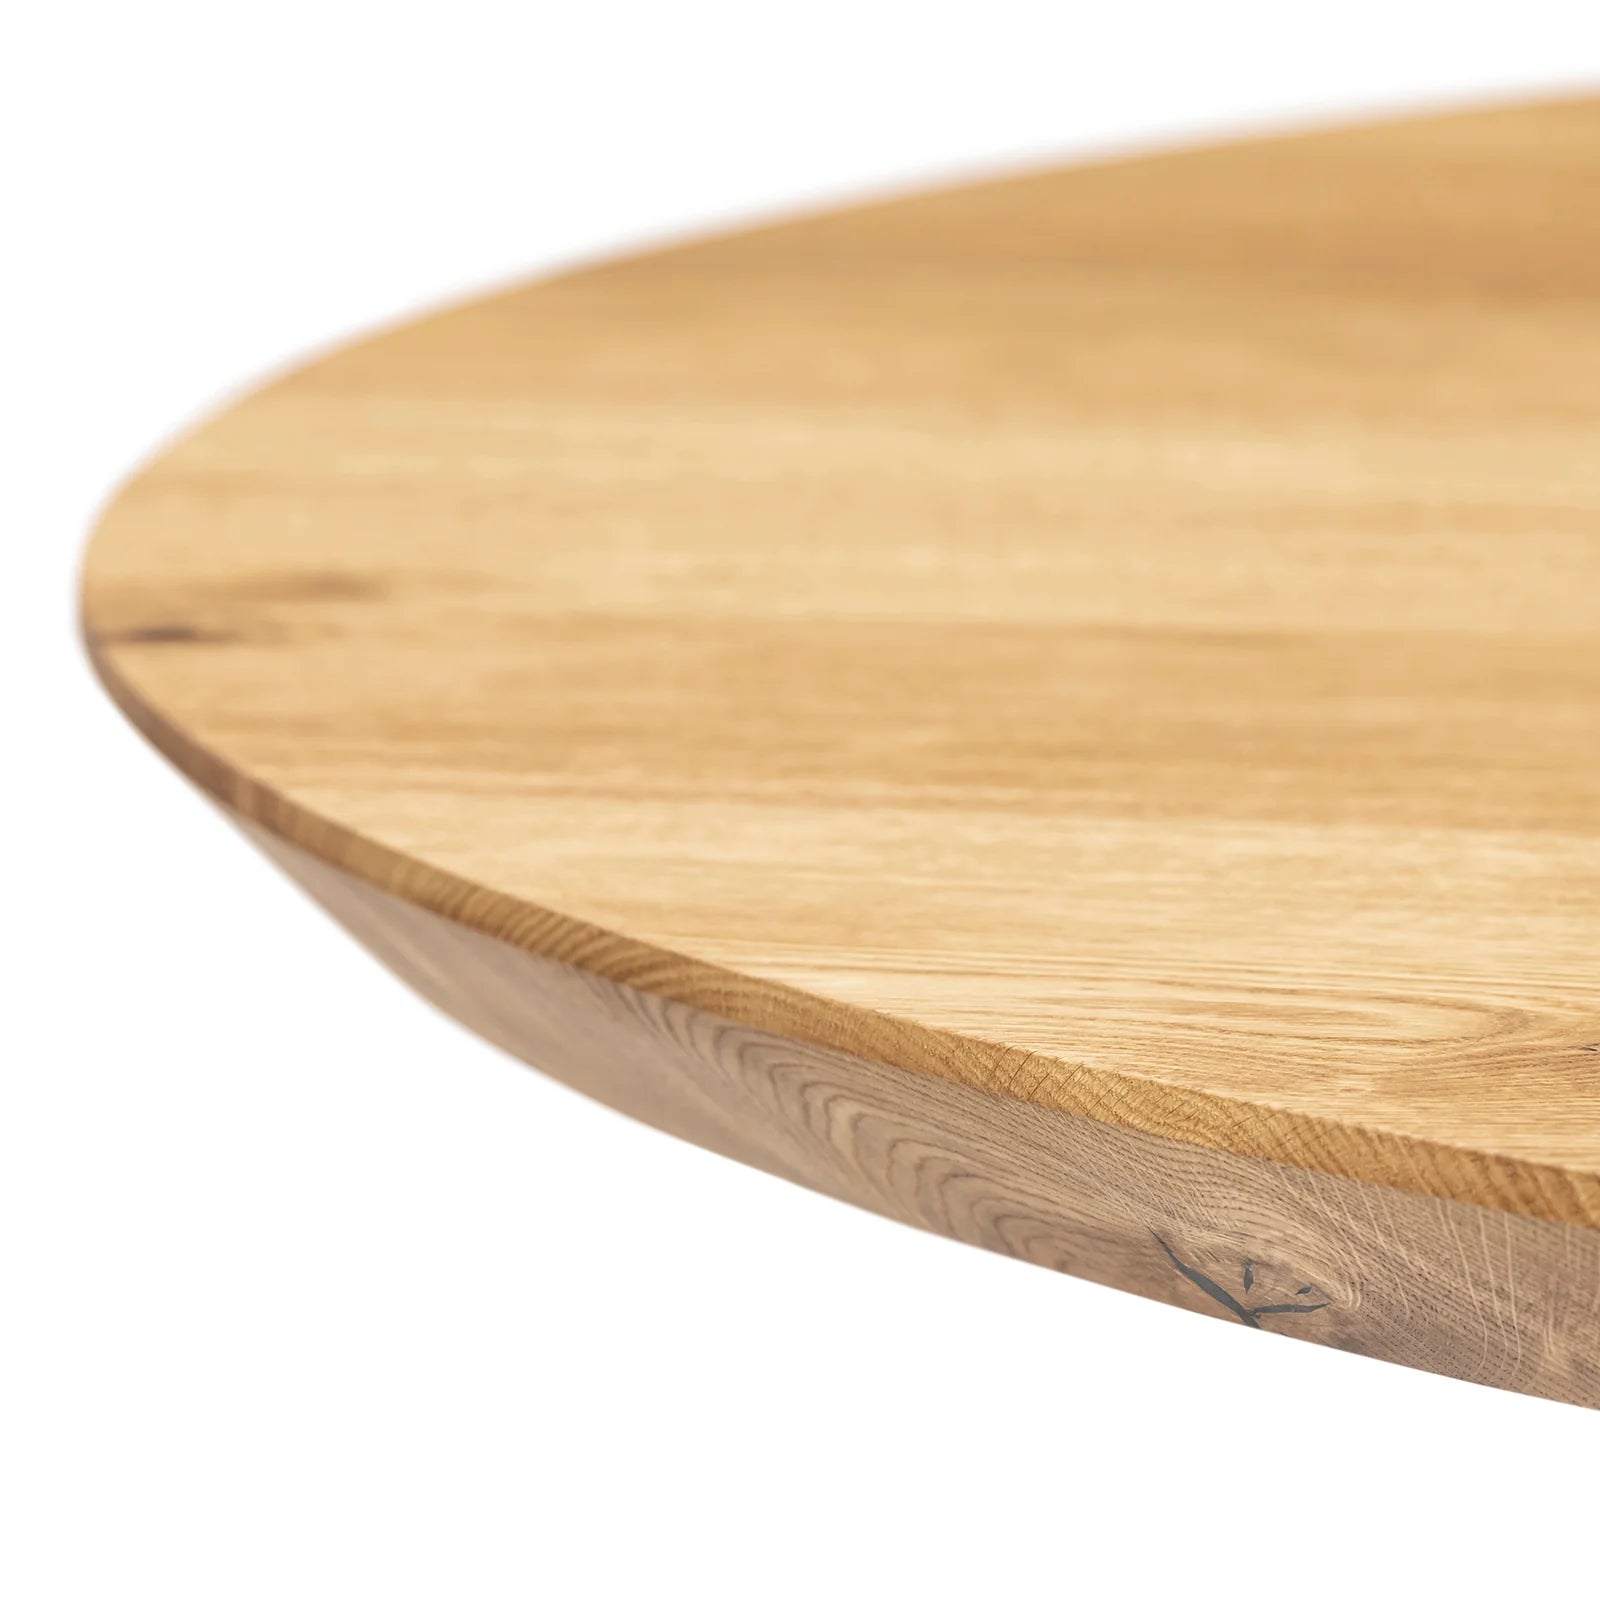 Round Oak Dining Table Extendable - S10Home